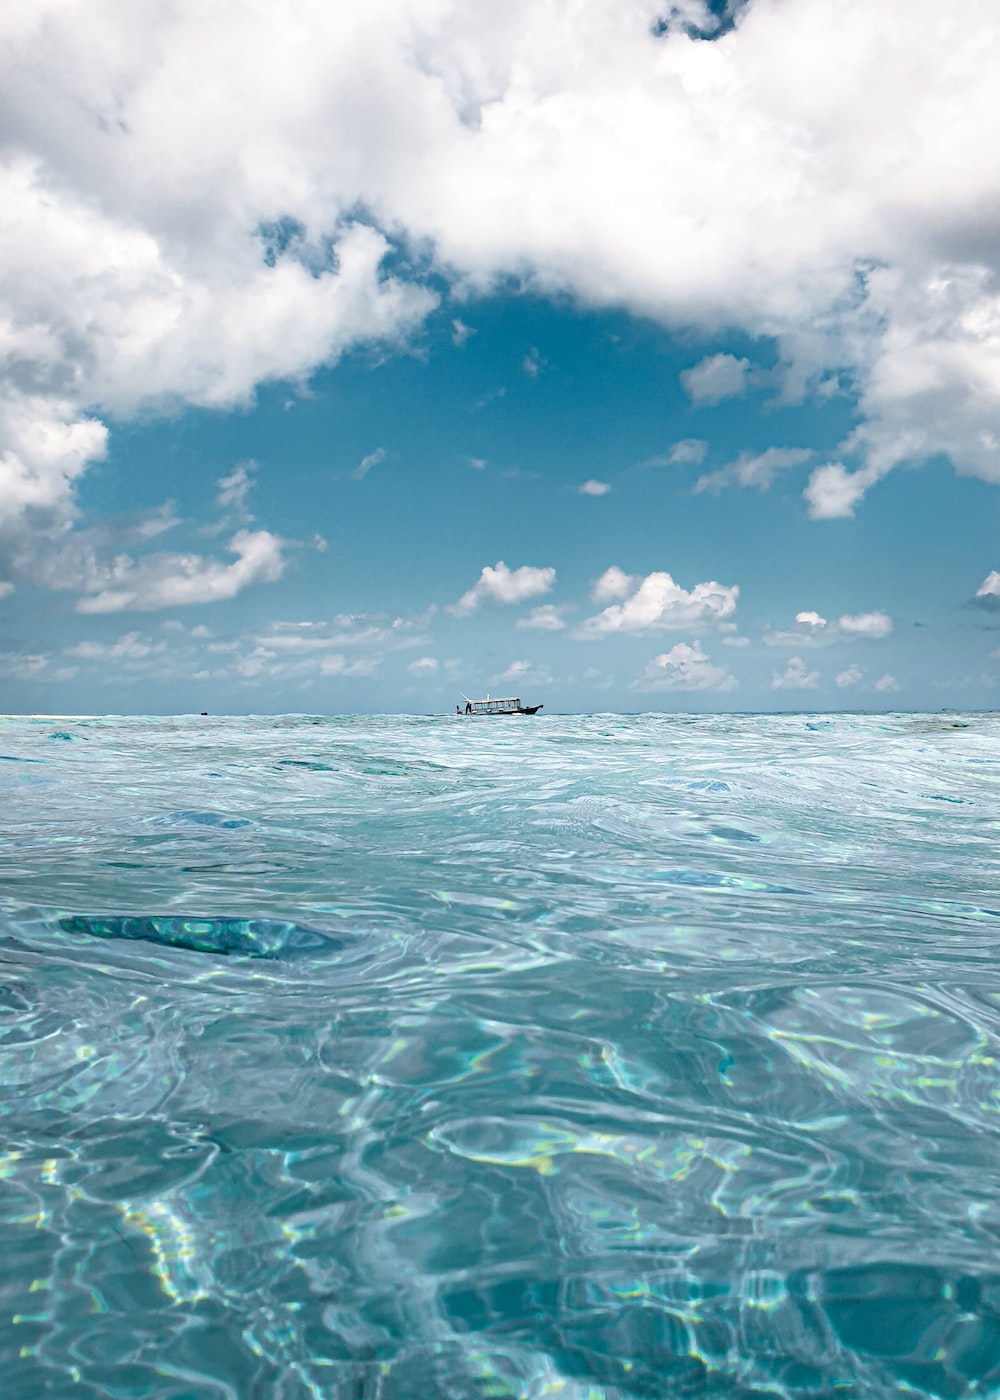 Sea And Sky Picture. Download Free Image